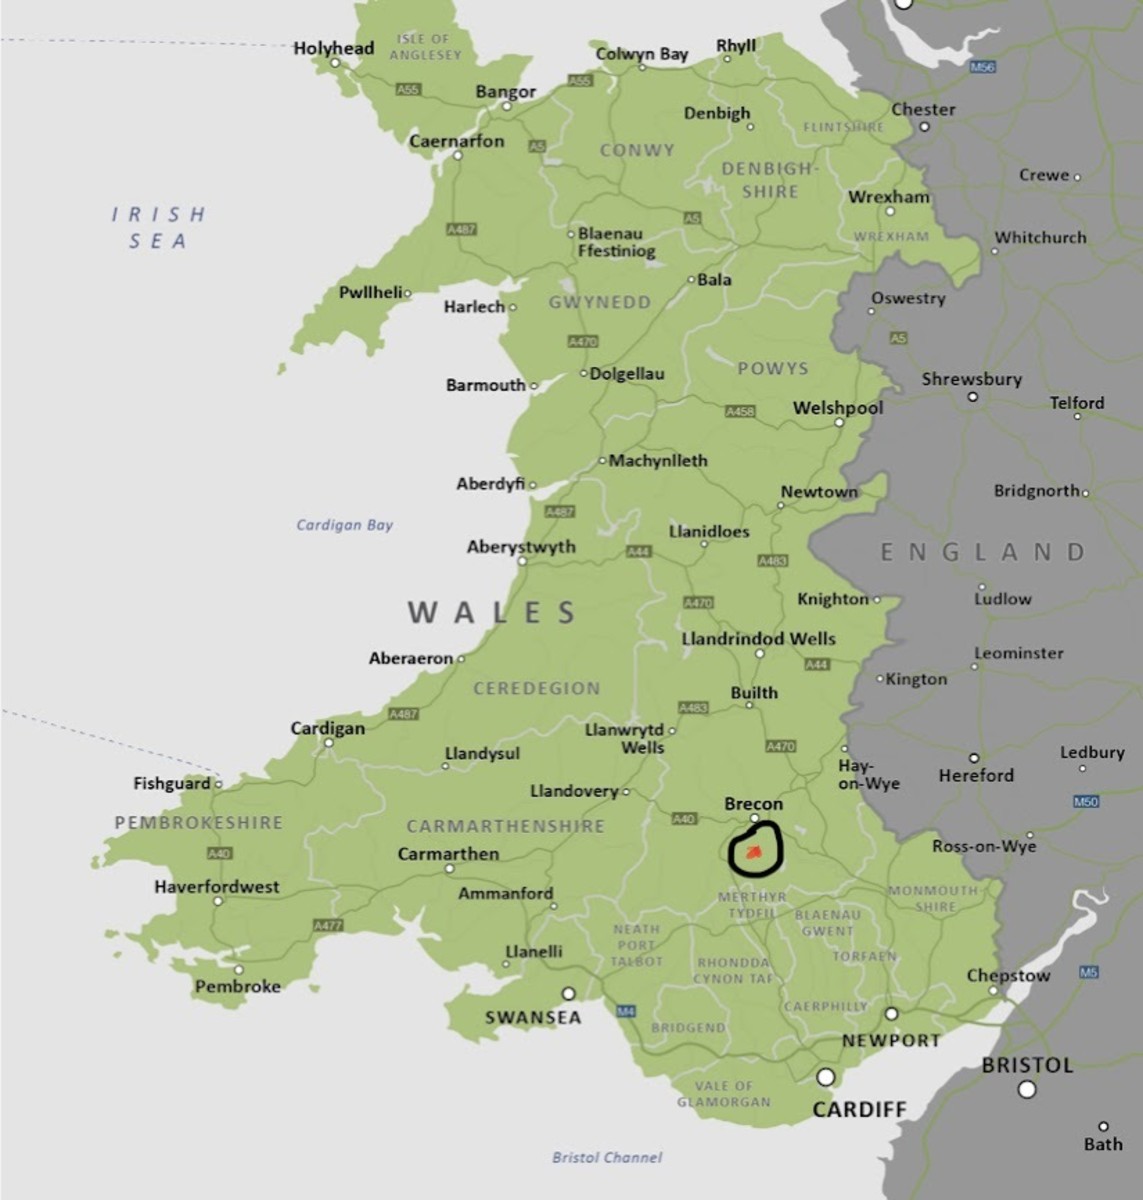 The location of the walk, in the Brecon Beacons, Wales.